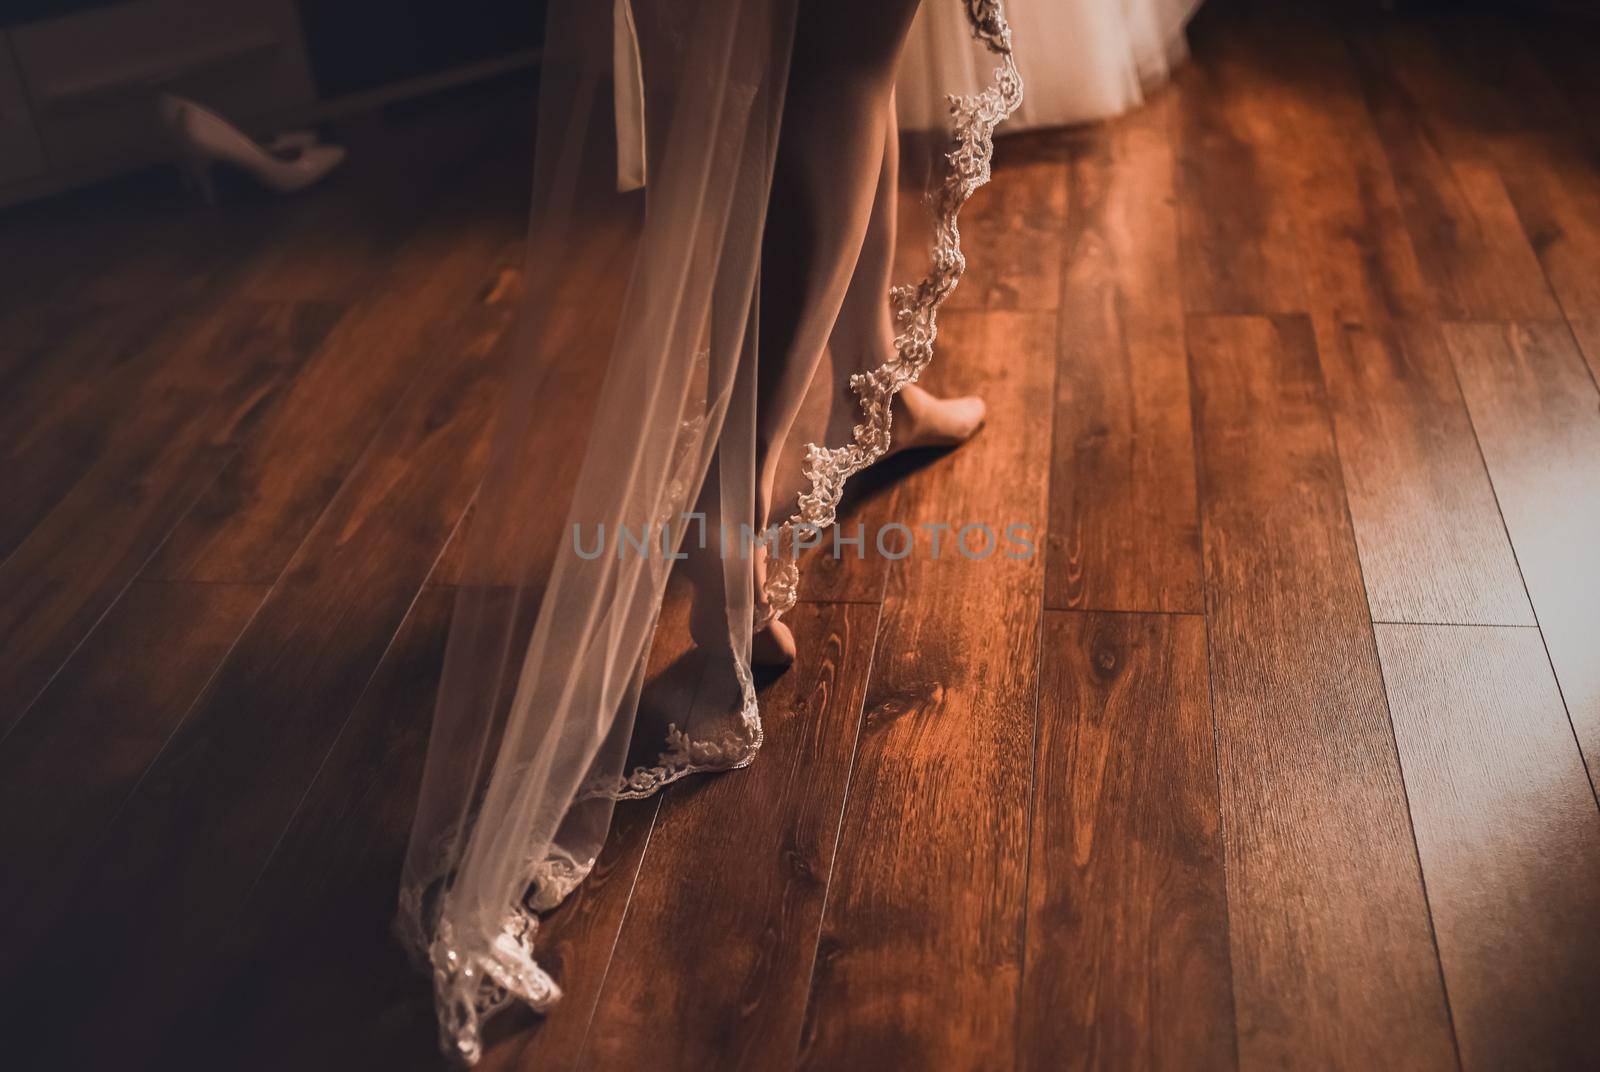 The bride's legs in white stockings walk along the brown wooden parquet floor, there is a long lace veil in the back. dark background